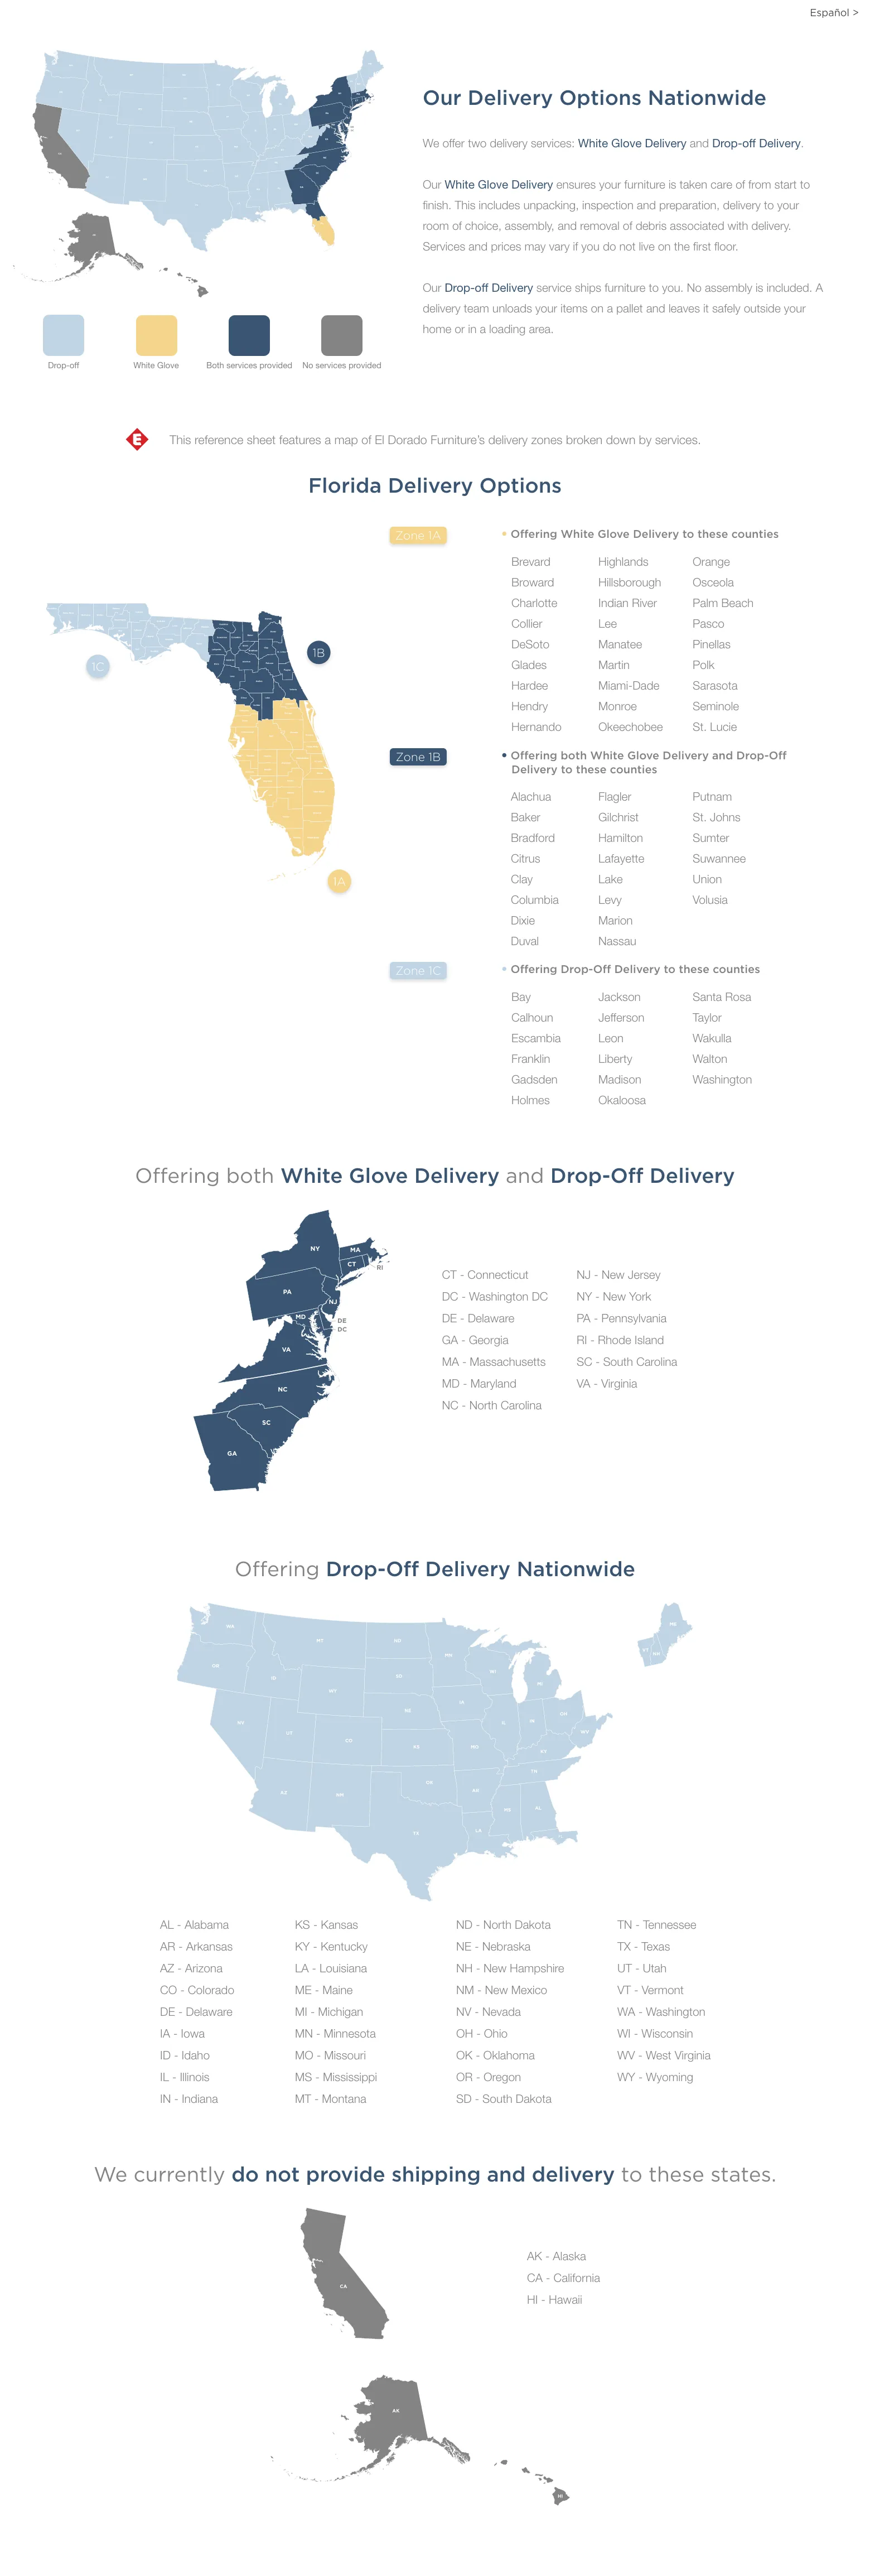 Our Delivery Options Nationwide We offer two delivery services: White Glove Delivery and Drop-off Delivery.Our White Glove Delivery ensures your furniture is taken care of from start to finish. This includes unpacking, inspection and preparation, delivery to your room of choice, assembly and removal of debris associated with delivery. Services and prices may vary if you do not live on the first floor.Our Drop-off Delivery service ships furniture to you. No assembly is included. A delivery team unloads your items on a pallet and leaves it safely outside your home or in a loading area. Recommended for smaller items that require no assembly.This reference sheet features a map of El Dorado Furniture’s delivery zones broken down by services.  Florida Delivery Options • Offering White Glove Delivery to these counties.Zone 1A Brevard  Broward Charlotte Collier DeSoto Glades Hardee HendryHernando Highlands Hillsborough Indian River Lee Manatee Martin Miami-DadeMonroe Okeechobee Orange Osceola Palm Beach Pasco Pinellas Polk Sarasota Seminole St. Lucie  • Offering both White Glove Delivery and Drop-Off Delivery to these countiesZone 1B Alachua Baker Bradford Citrus Clay Columbia Dixie Duval Flagler Gilchrist Hamilton Lafayette Lake Levy Marion Nassau Putnam St. Johns Sumter Suwannee Union Volusia • Offering Drop-Off Delivery to these countiesZone 1C Bay Calhoun Escambia Franklin Gadsden Holmes Jackson Jefferson Leon LibertyMadison Okaloosa Santa Rosa Taylor Wakulla Walton Washington Offering both White Glove Delivery and Drop-Off DeliveryCT - Connecticut DC - Washington DC DE - Delaware GA - Georgia MA - Massachusetts MD - Maryland NC - North Carolina NJ - New Jersey NY - New York PA - Pennsylvania RI - Rhode Island SC - South Carolina VA - Virginia Offering Drop-Off Delivery NationwideAL - Alabama AR - Arkansas AZ - Arizona CO - Colorado DE - Delaware IA - IowaID - Idaho IL - Illinois IN - Indiana KS - Kansas KY - Kentucky LA - Louisiana ME - Maine MI - Michigan MN - Minnesota MO - Missouri MS - Mississippi MT - Montana ND - North Dakota NE - Nebraska NH - New Hampshire NM - New Mexico NV - Nevada OH - Ohio OK - Oklahoma OR - Oregon SD - South Dakota TN - Tennessee TX - Texas UT - Utah VT - Vermont WA - Washington WI - Wisconsin WV - West Virginia WY - Wyoming We currently do not provide shipping and delivery to these states.AK - Alaska CA - California HI - Hawaii